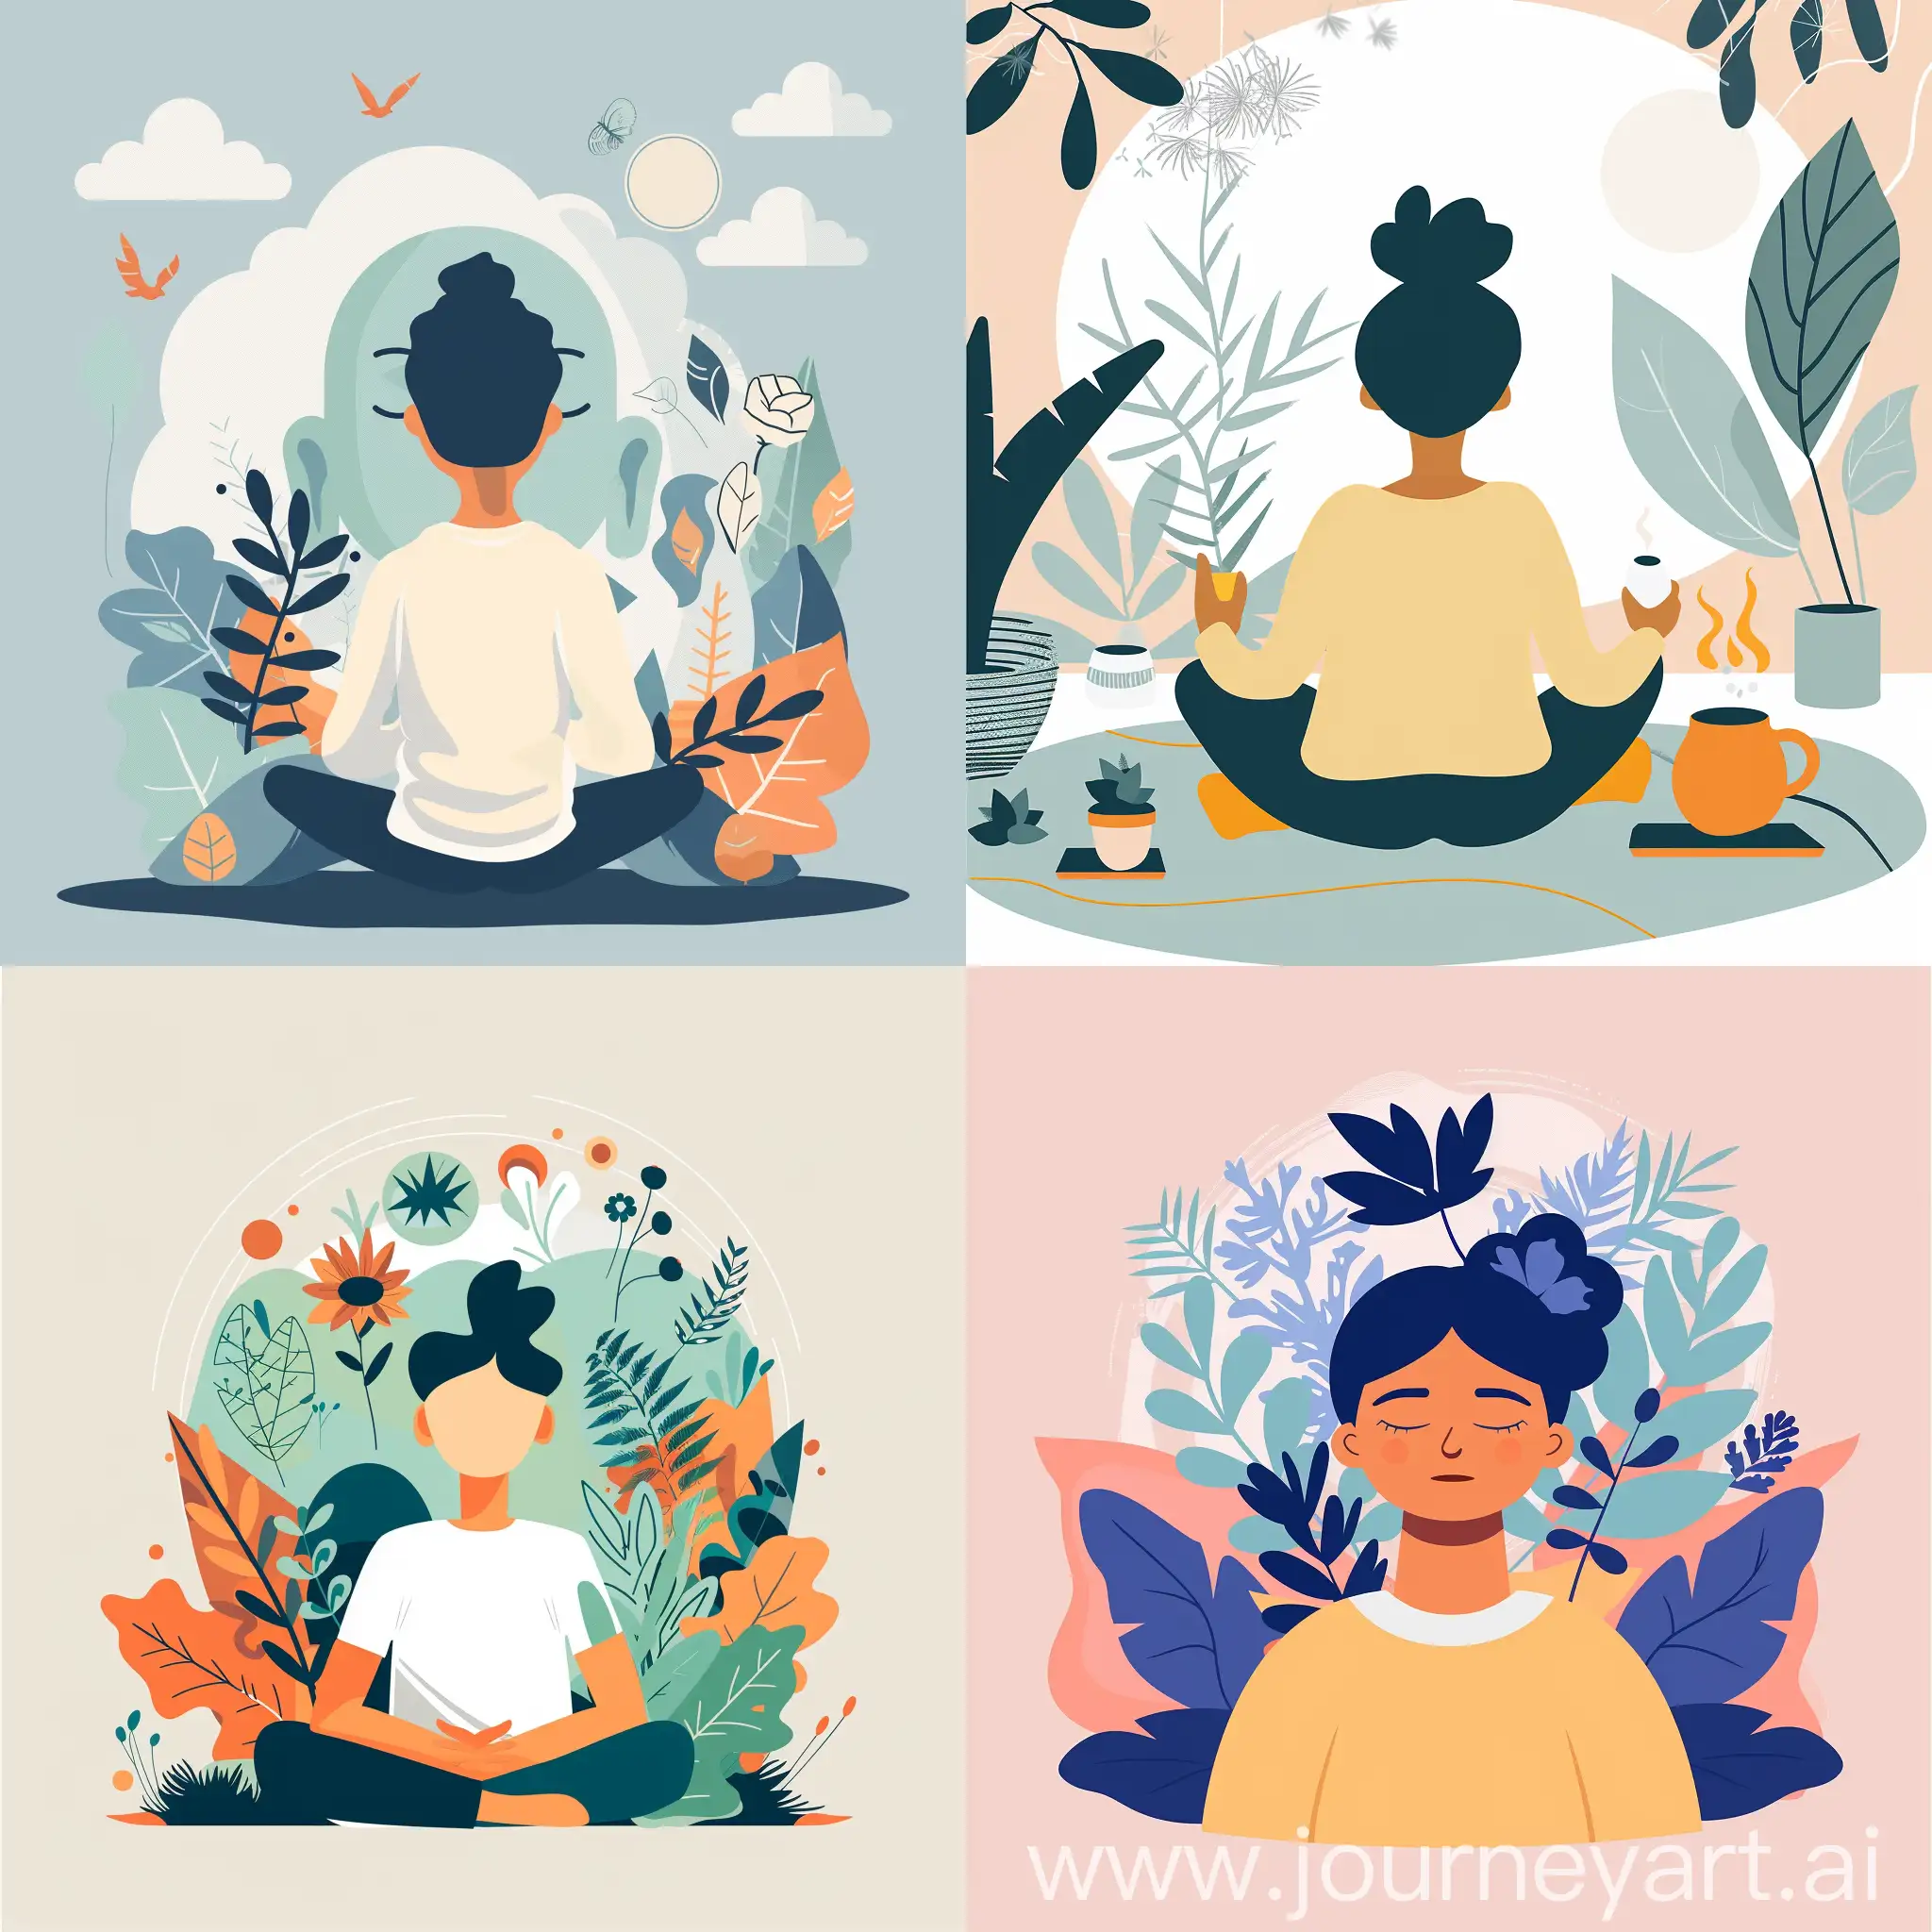 flat illustration of a person attending a mental health retreat to focus on self-care and renewal.